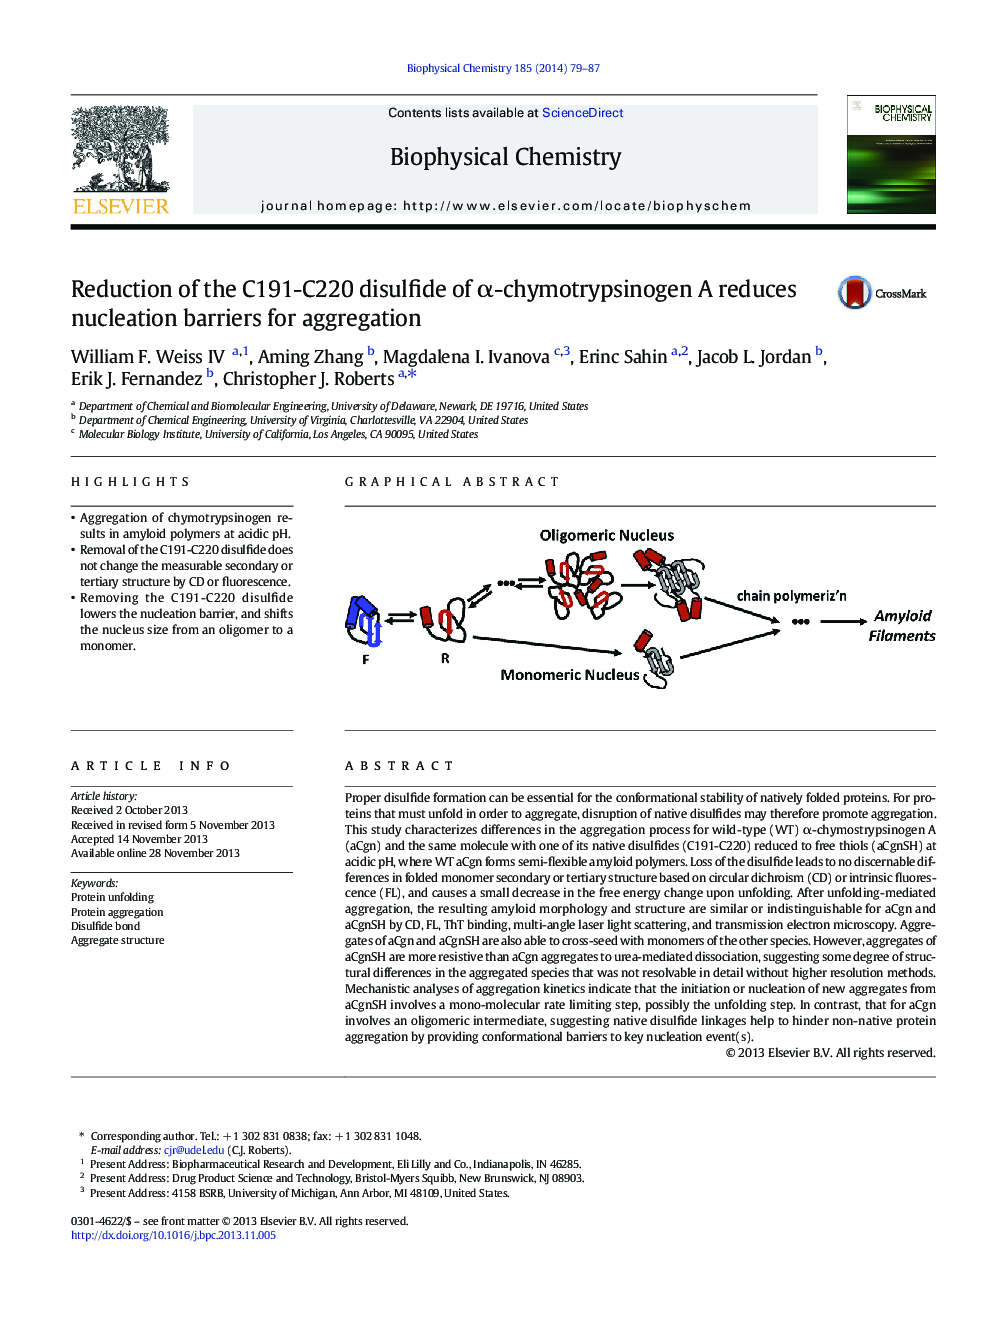 Reduction of the C191-C220 disulfide of Î±-chymotrypsinogen A reduces nucleation barriers for aggregation